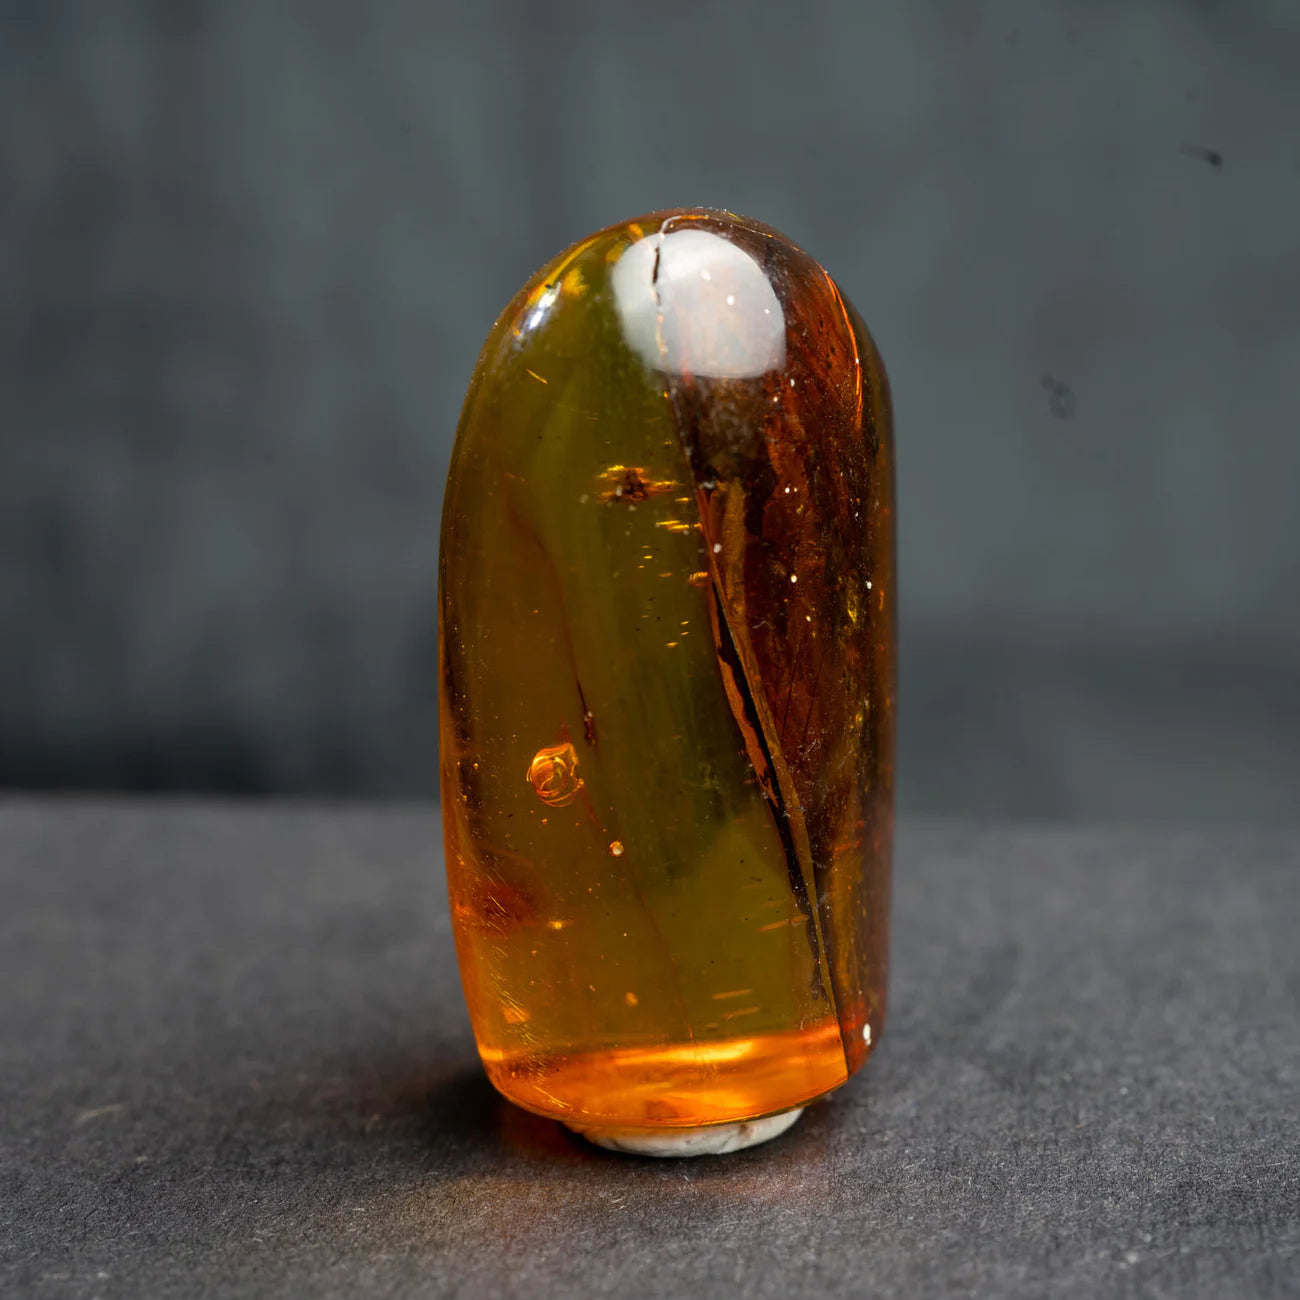 Red Amber - Natural Rare Red Variety of Amber - Geology In